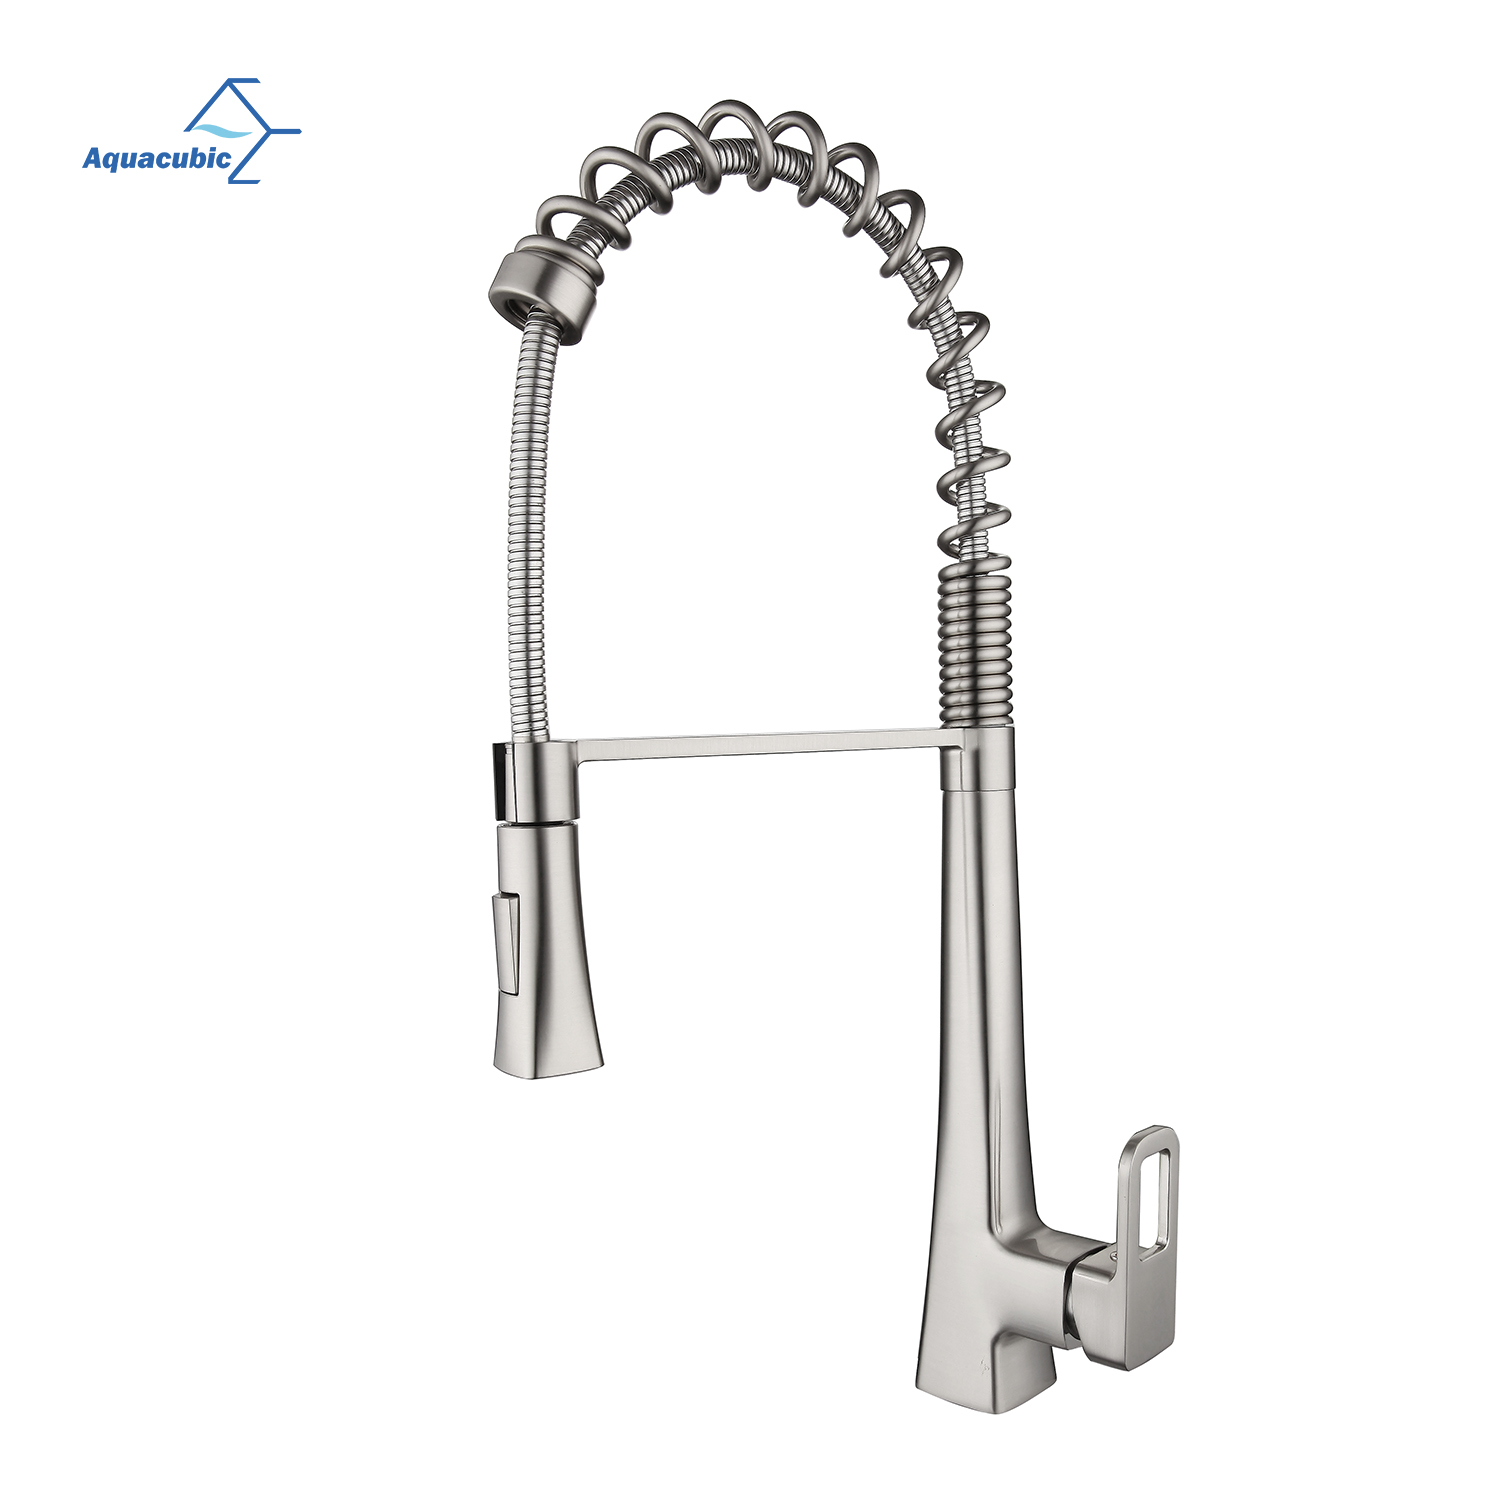 Aquacubic cUPC NSF Modern Low Lead Certified Design Stylish Spring Neck Pull Down Water Kitchen Faucet